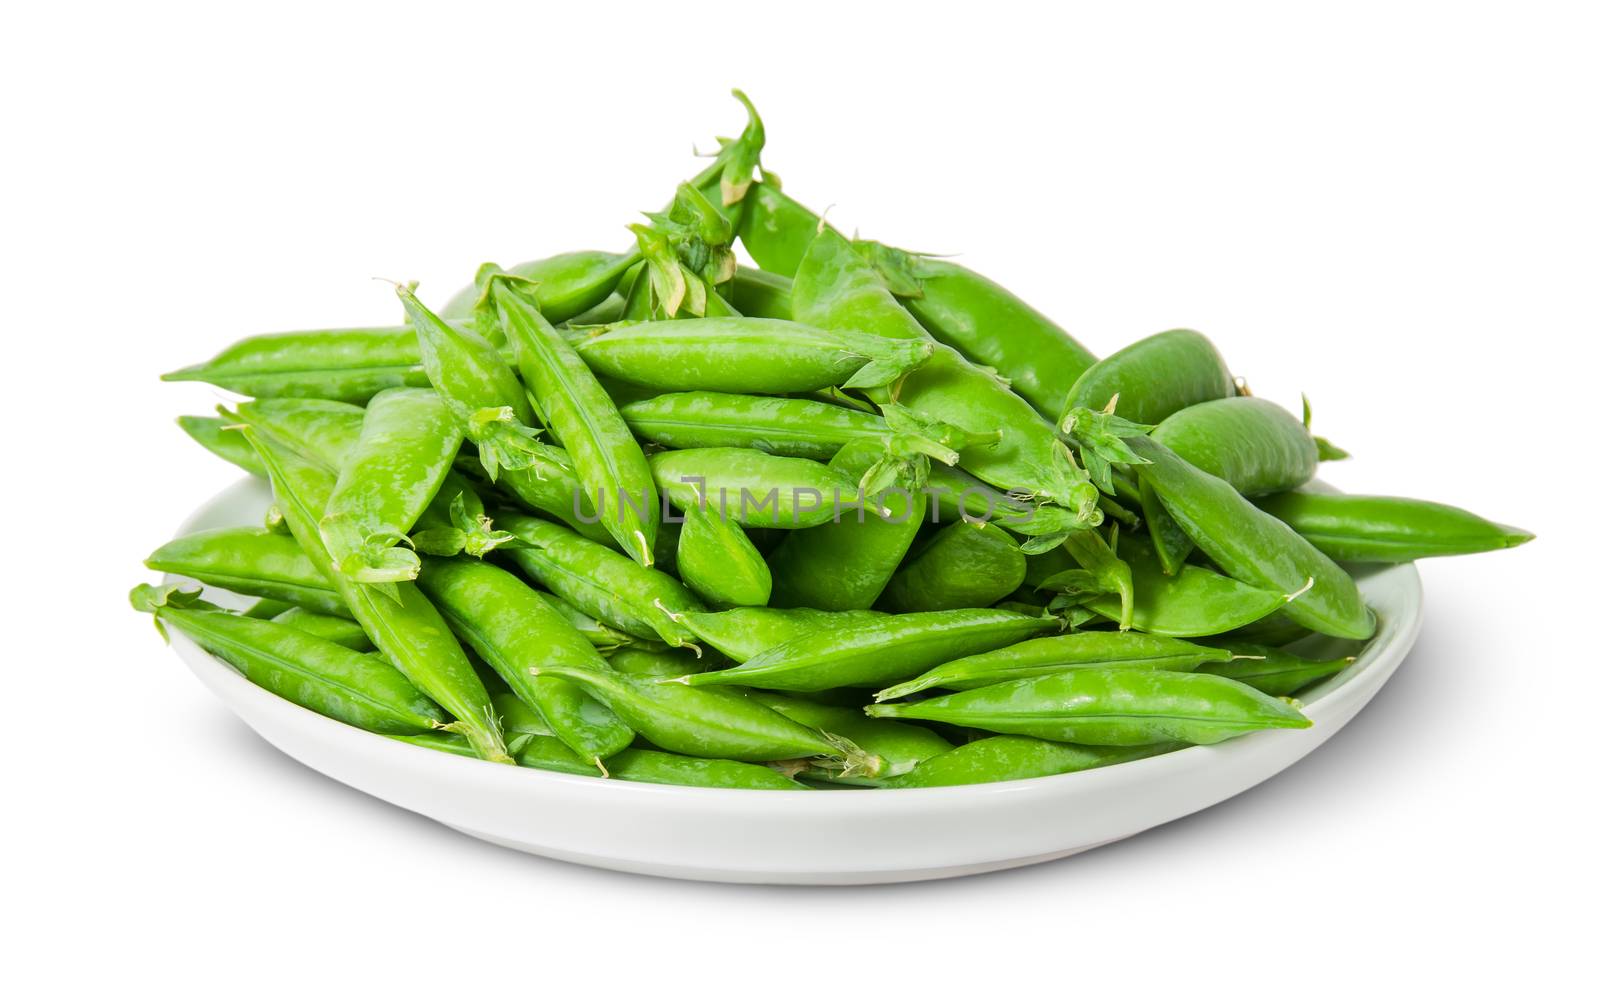 Big pile of green peas in pods on white plate by Cipariss